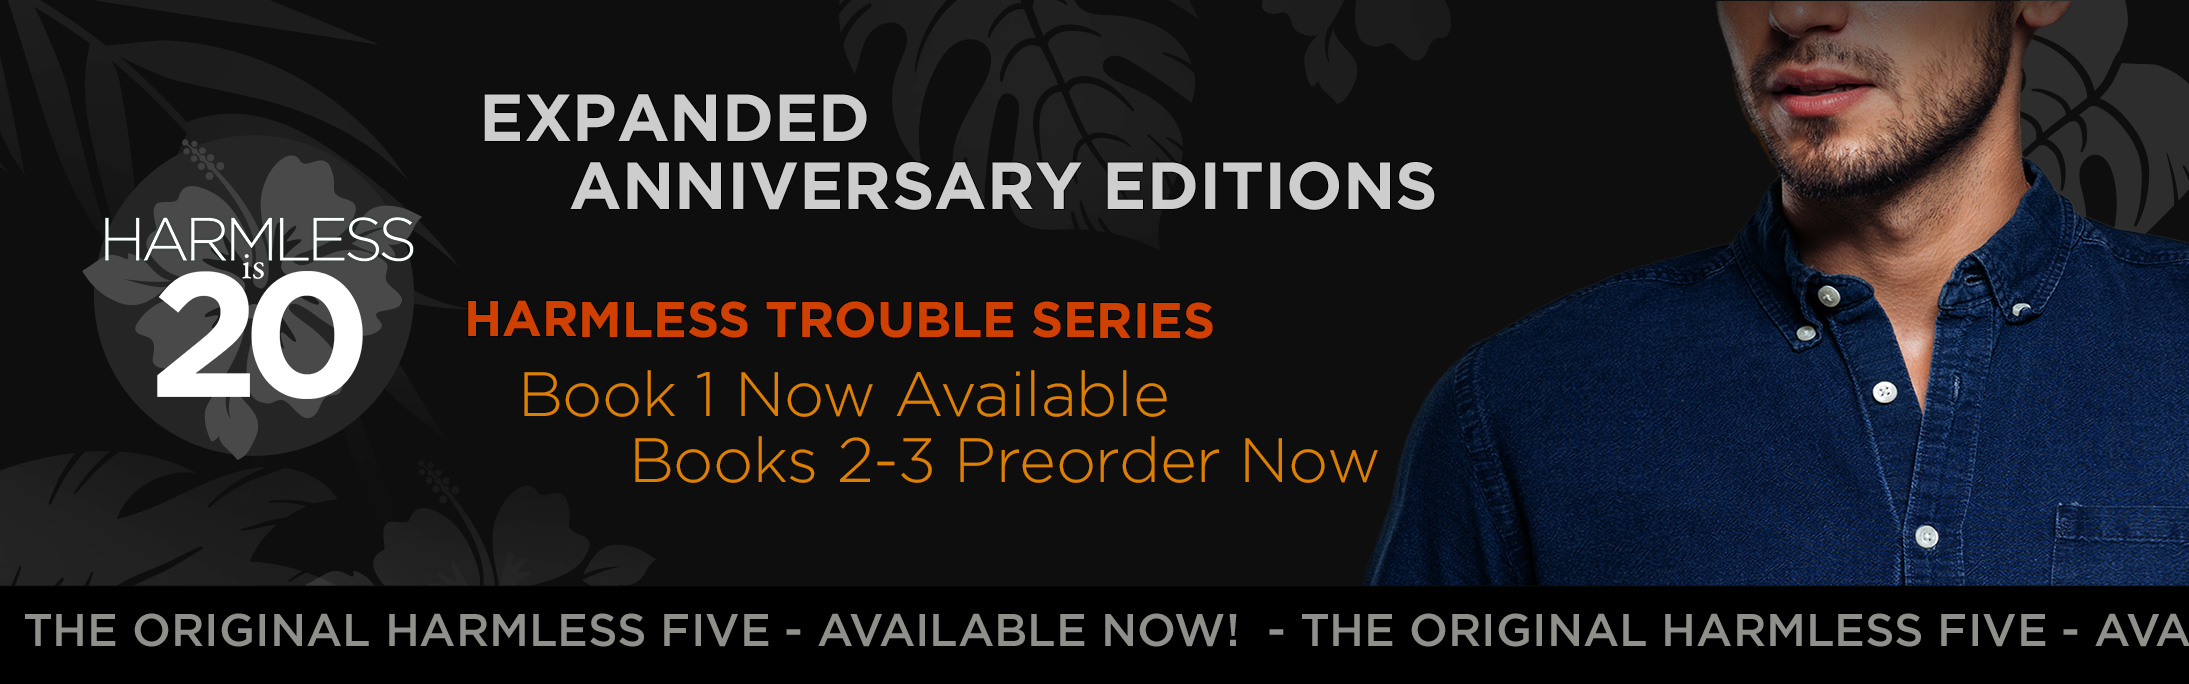 Expanded Anniversary Editions!